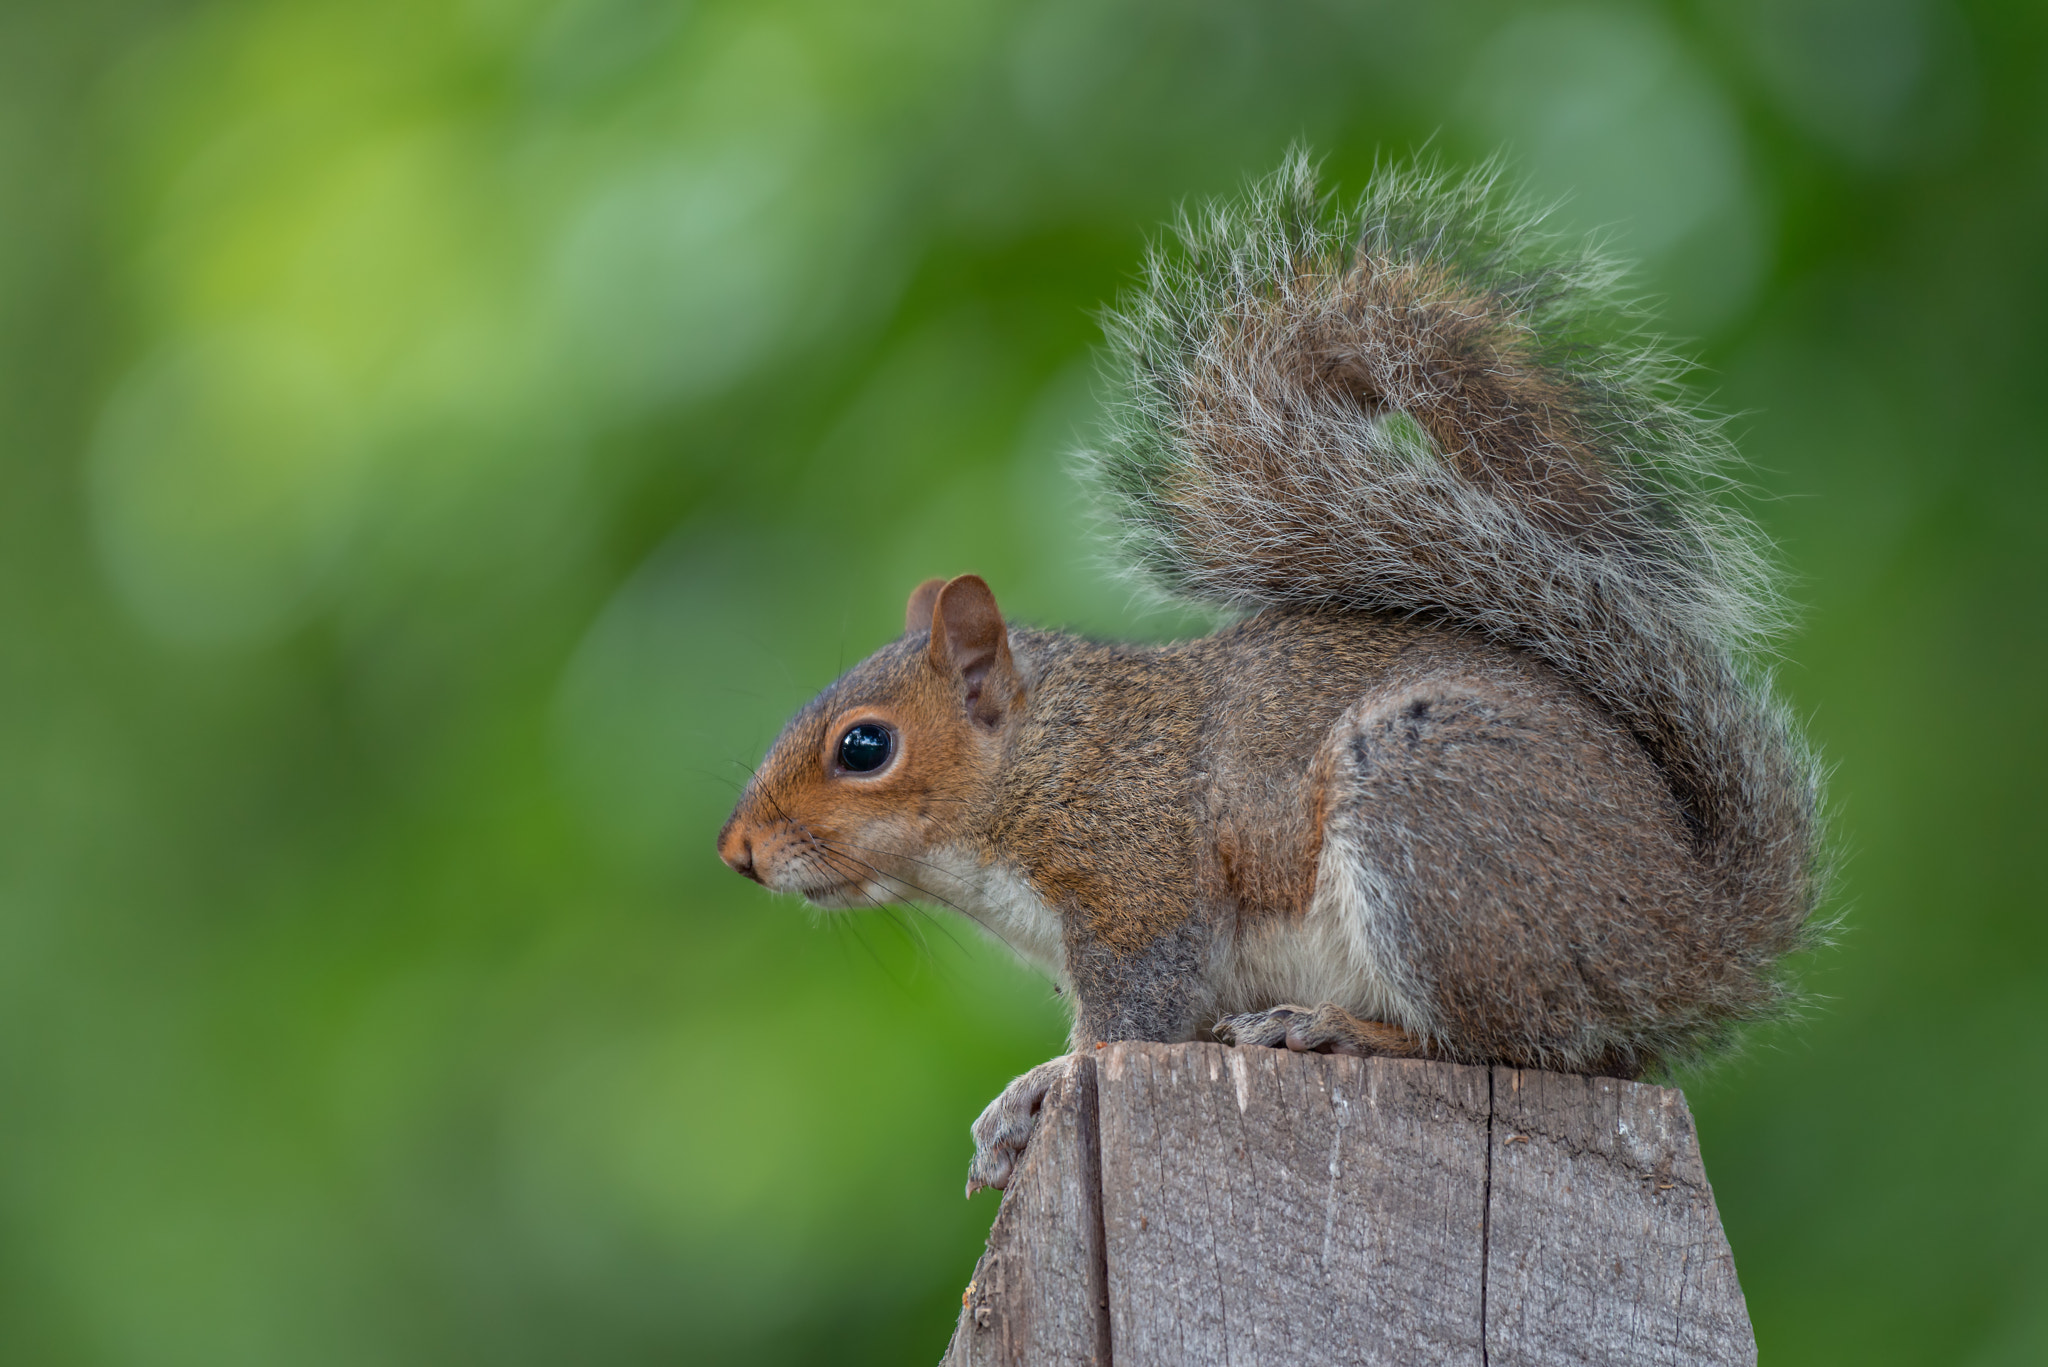 Nikon D800 + Nikon AF-S Nikkor 200-500mm F5.6E ED VR sample photo. An eastern gray squirrel rests on a wooden pole photography